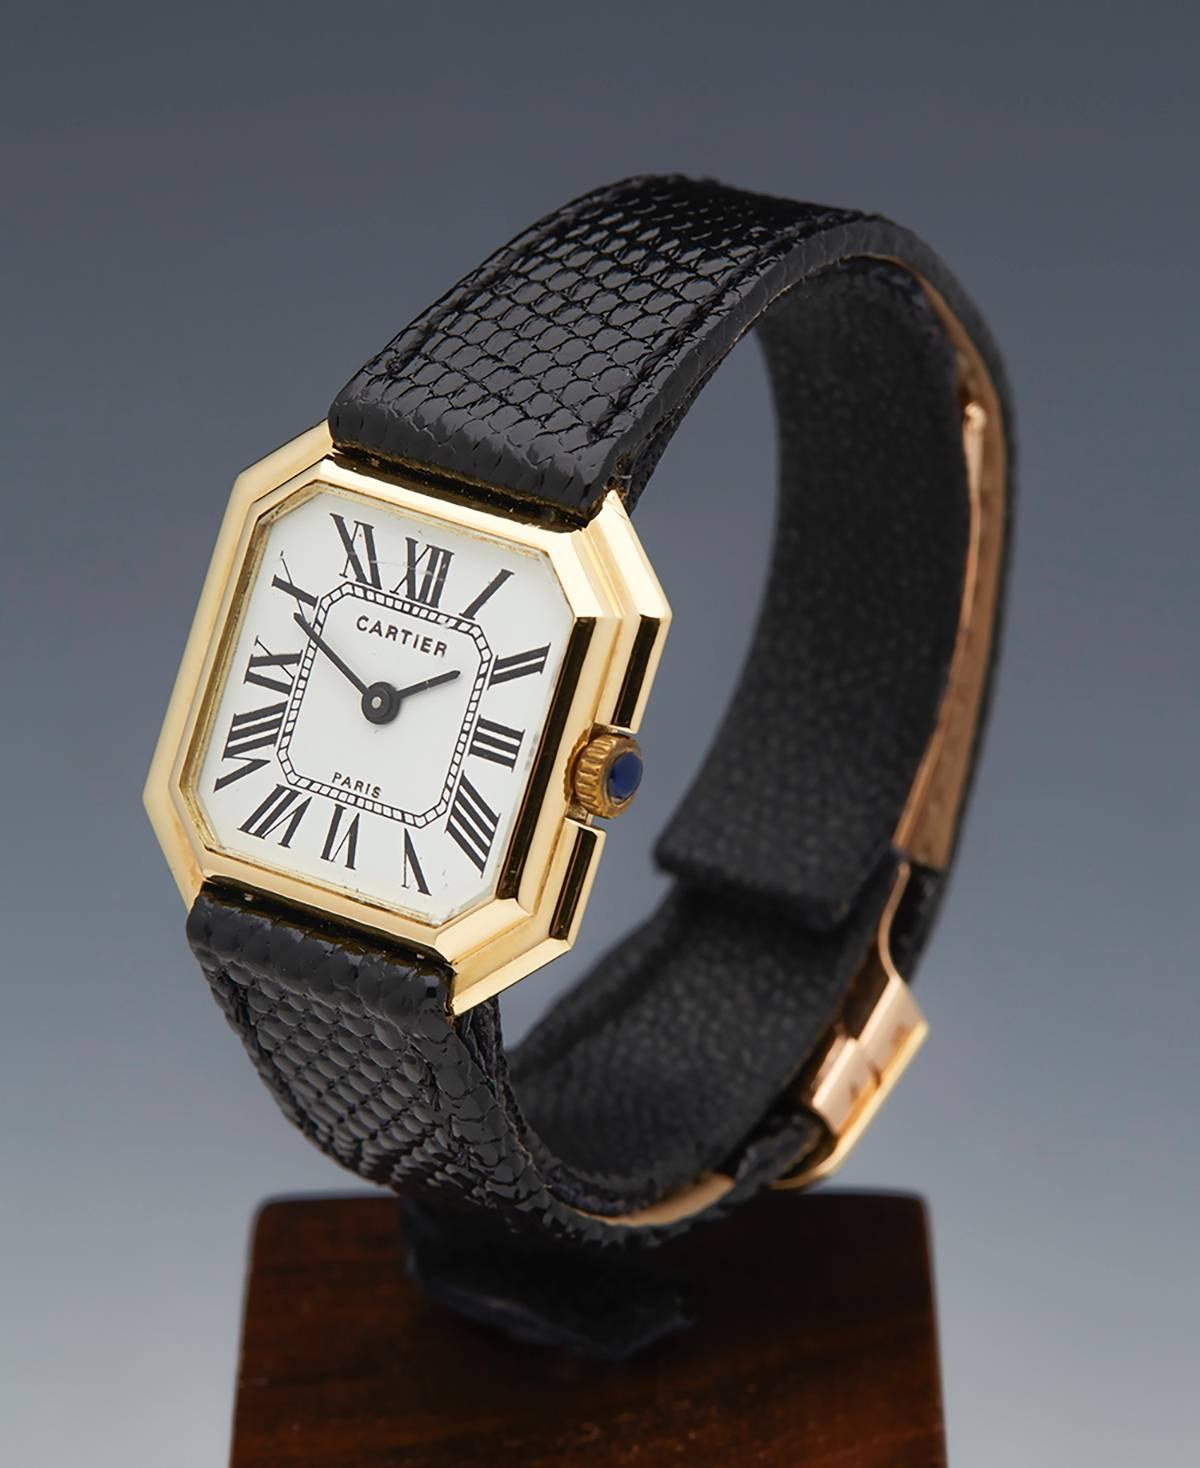 Specifications

Movement: Mechanical Wind
Case: 18k Yellow Gold
Case Diameter: 27mm
Dial: Original White Enamel with Roman Numerals
Bracelet: Black Lizard Leather
Strap Length: Adjustable
Strap Width: At Case 16mm / At Buckle 12mm
Buckle: